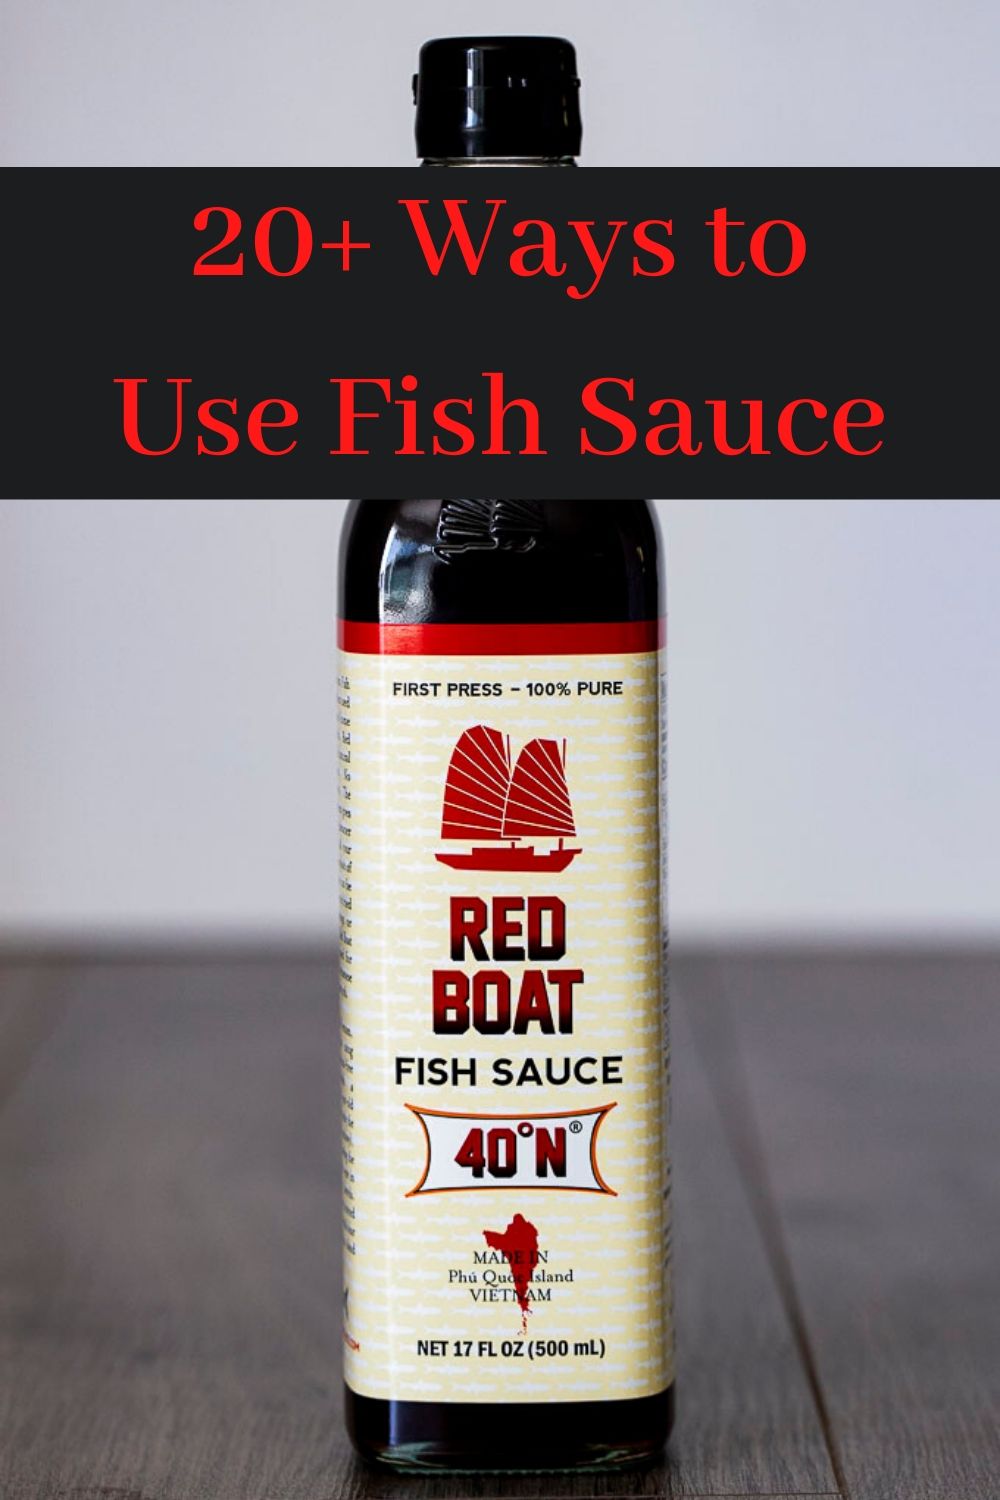 20+ Ways to Use Fish Sauce That Will Change Your Life